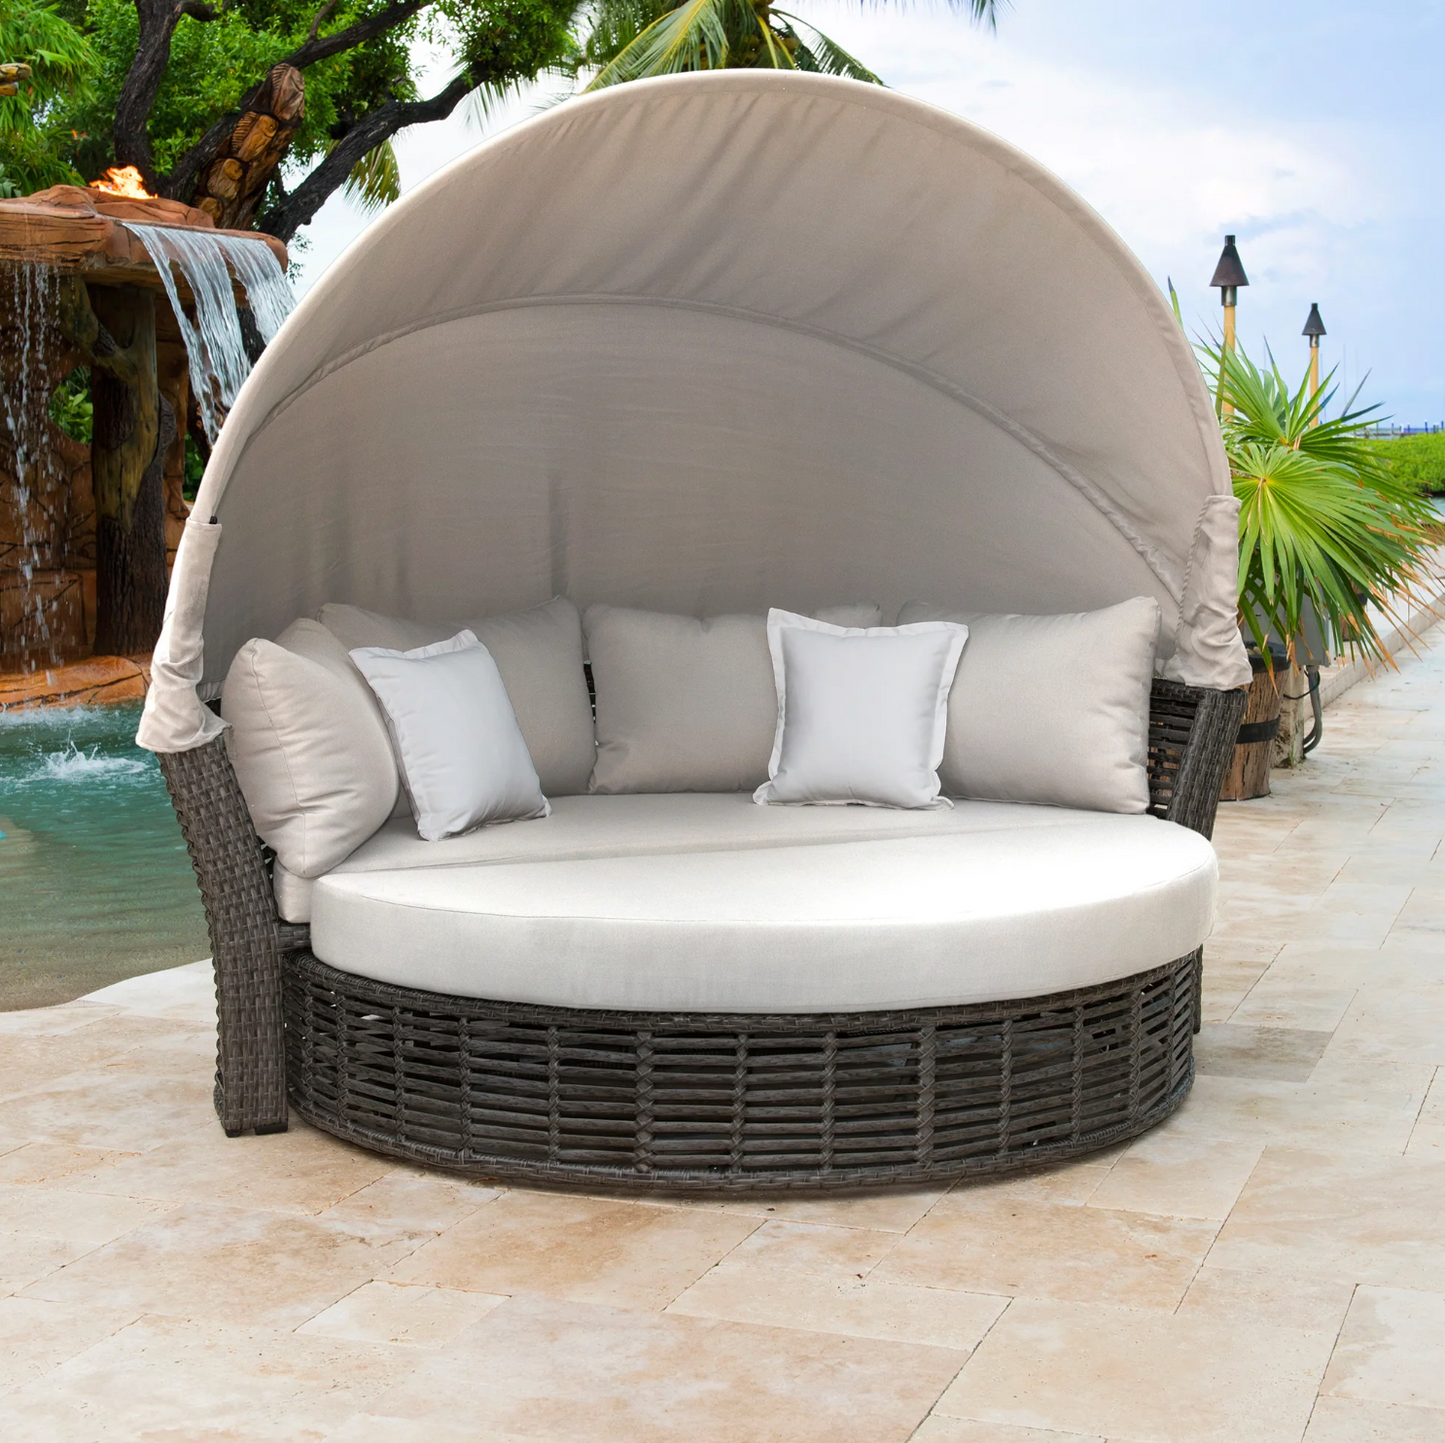 PANAMA JACK GRAPHITE CANOPY DAYBED WITH CUSHIONS